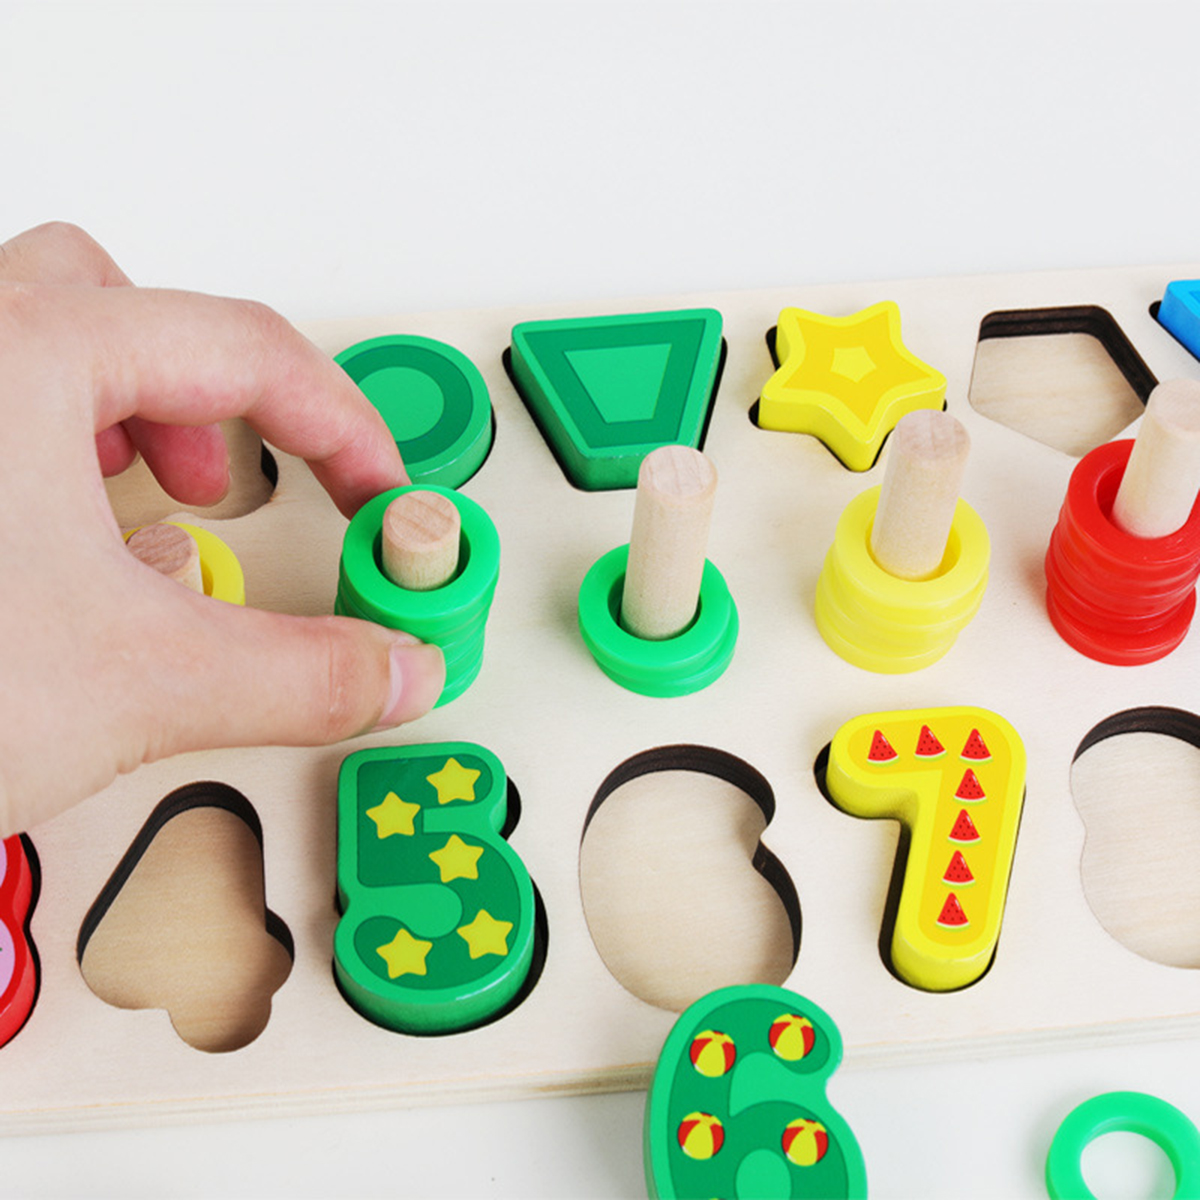 Children-Kids-Wooden-Learning-Digital-Matching-Early-Education-Teaching-Math-Toys-1434254-6